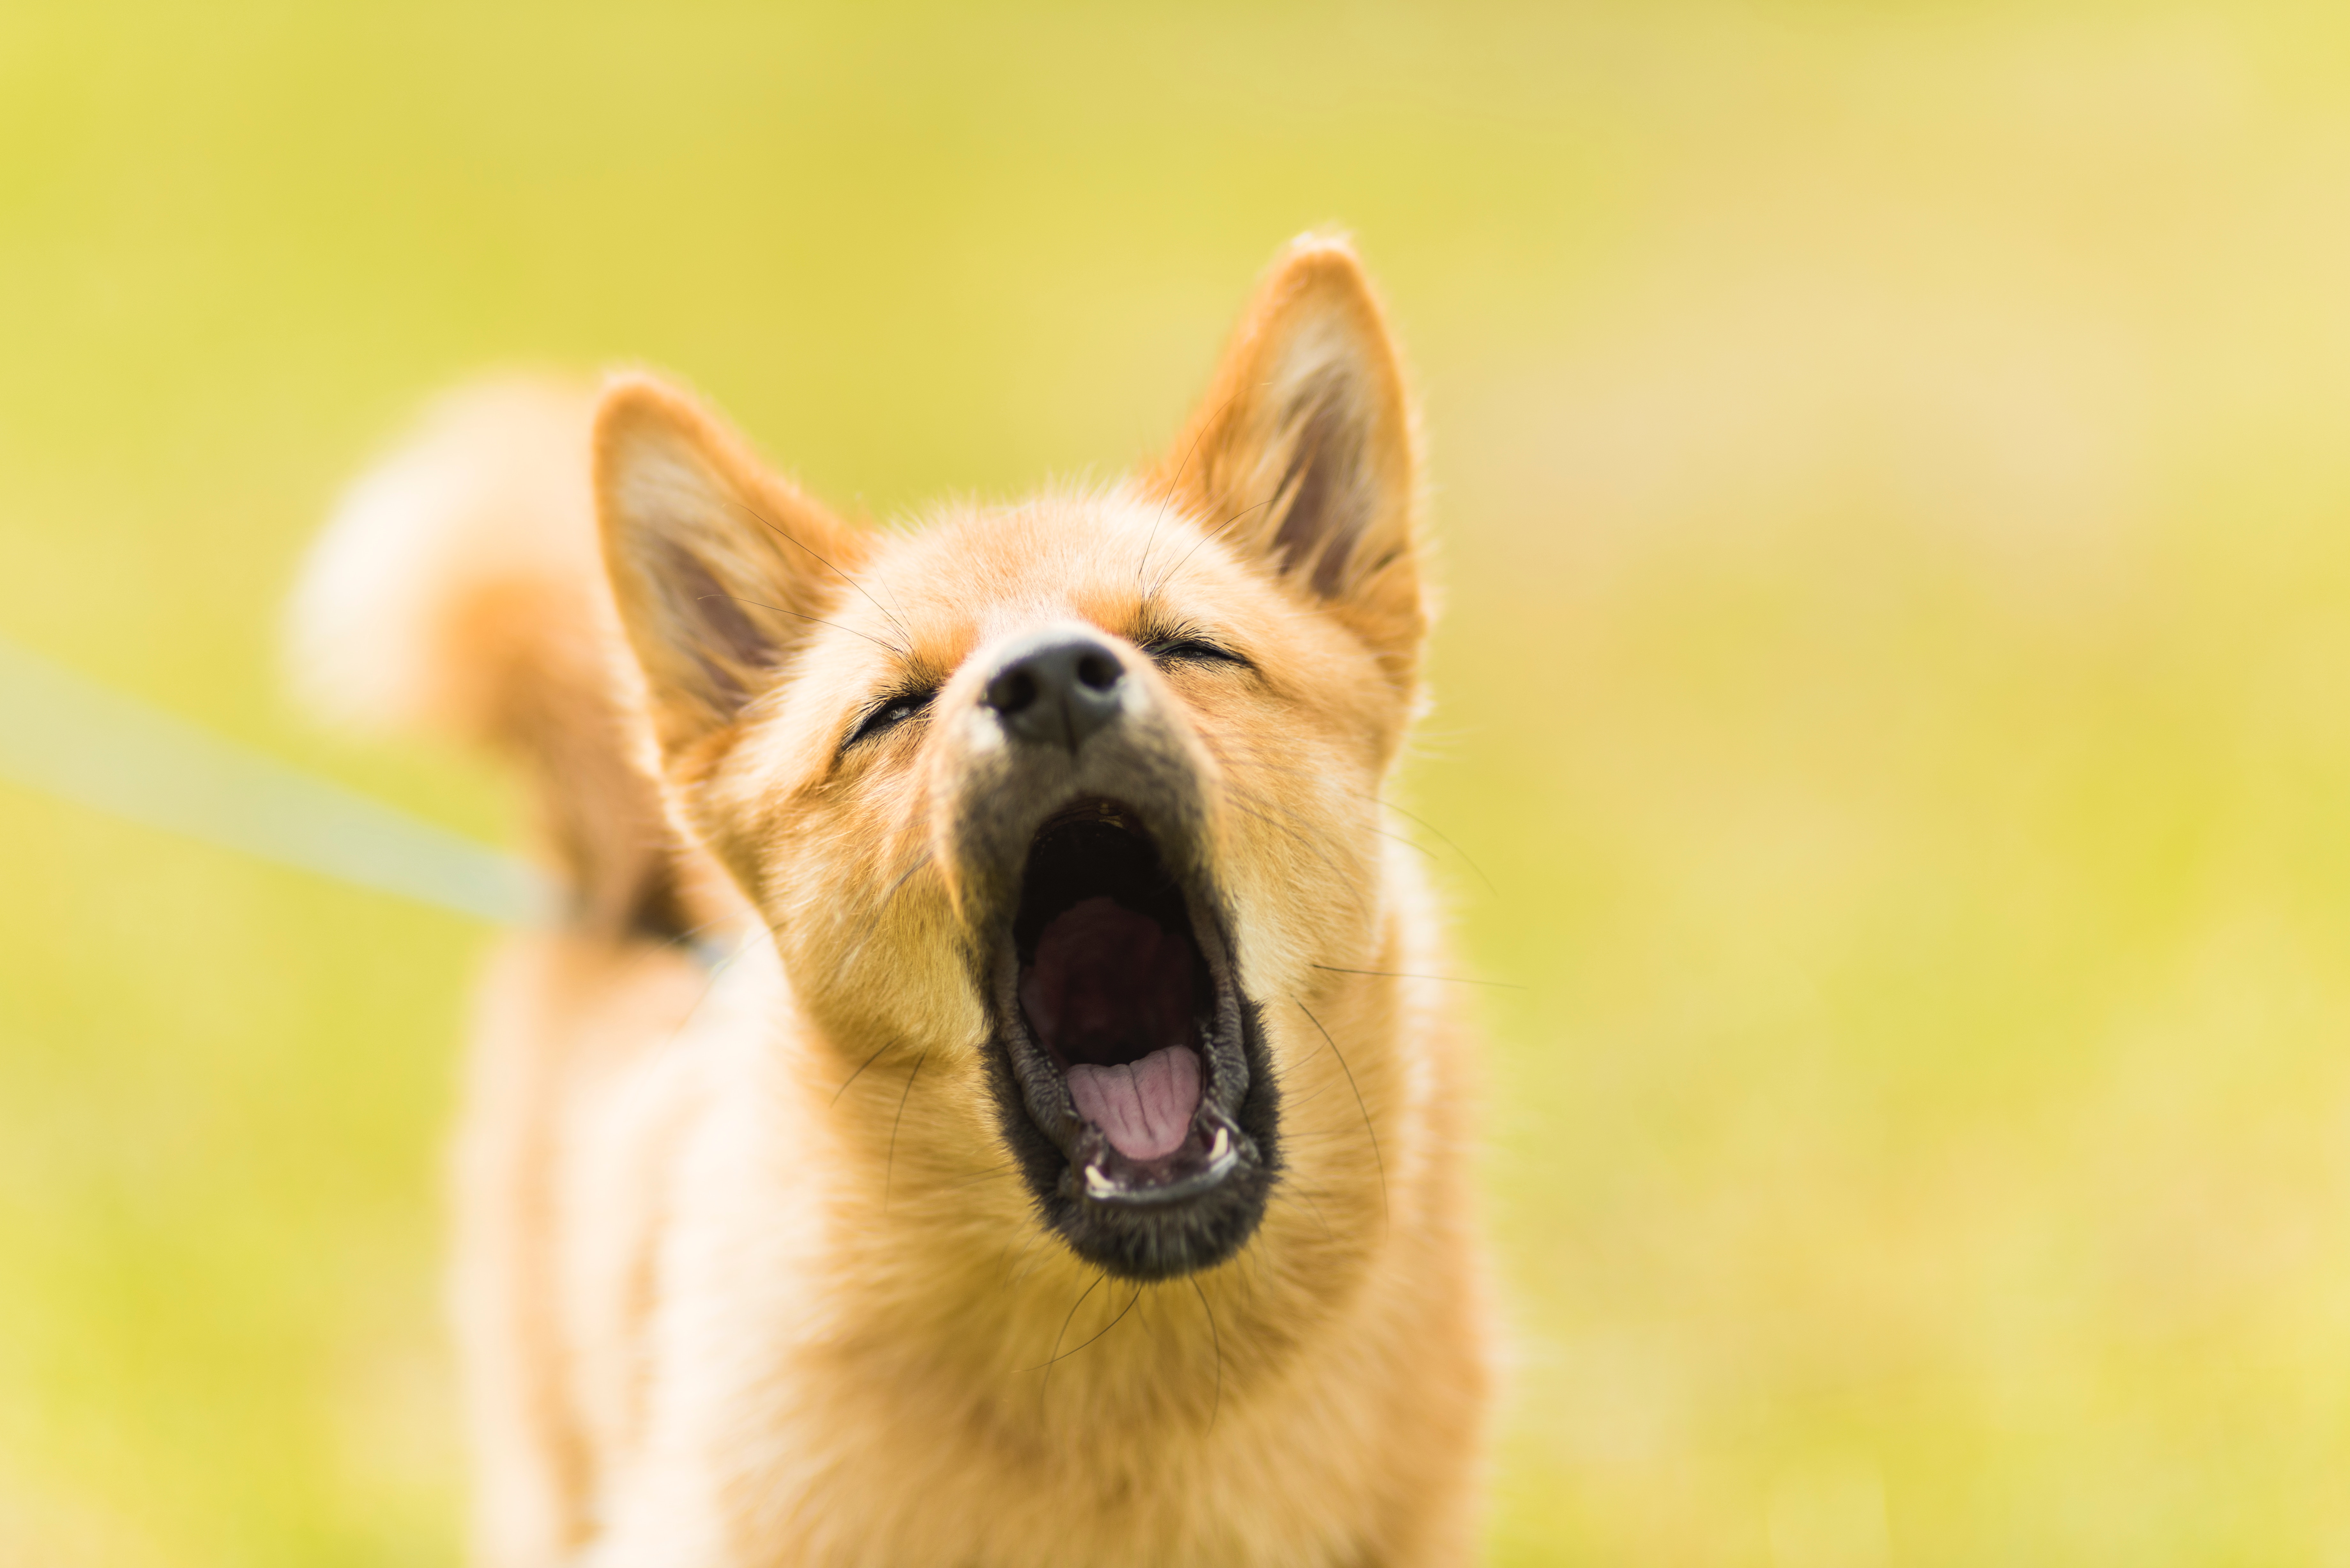 puppy barking- how to train a dog not to bark